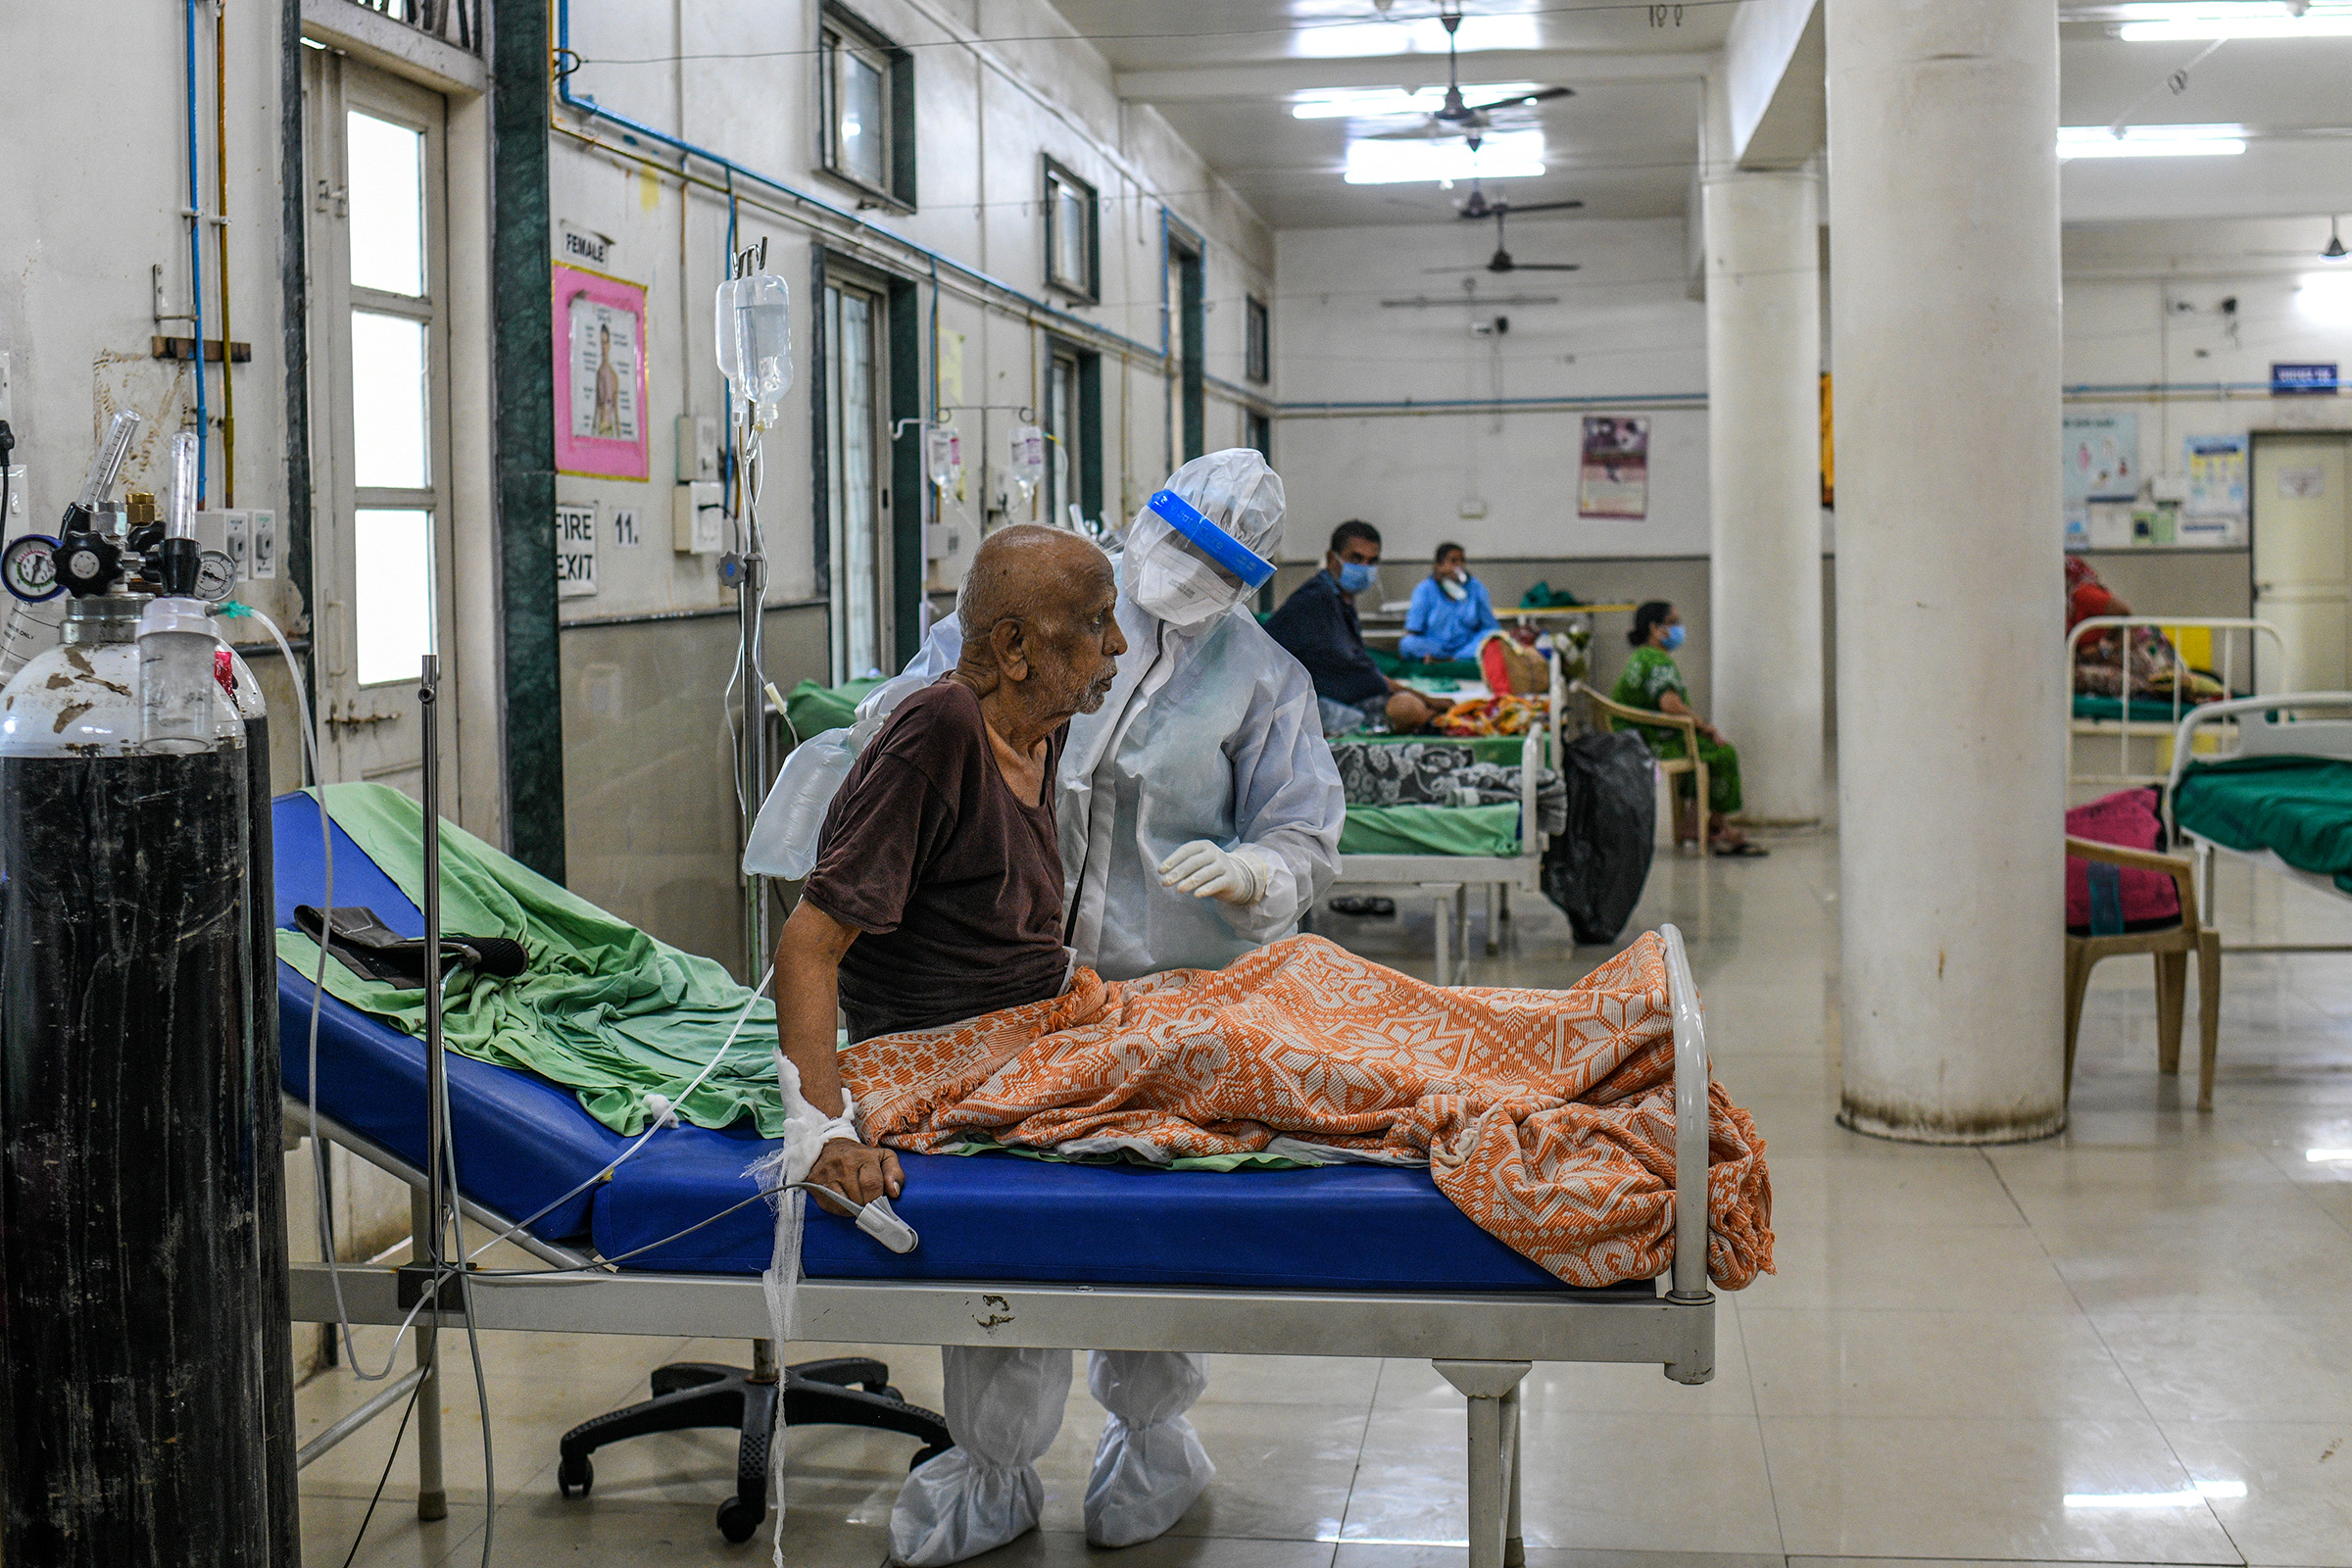 A nurse cares for a COVID-19 patient in the ICU at the Aundh District Hospital in Pune on Aug. 11. (Atul Loke for TIME)